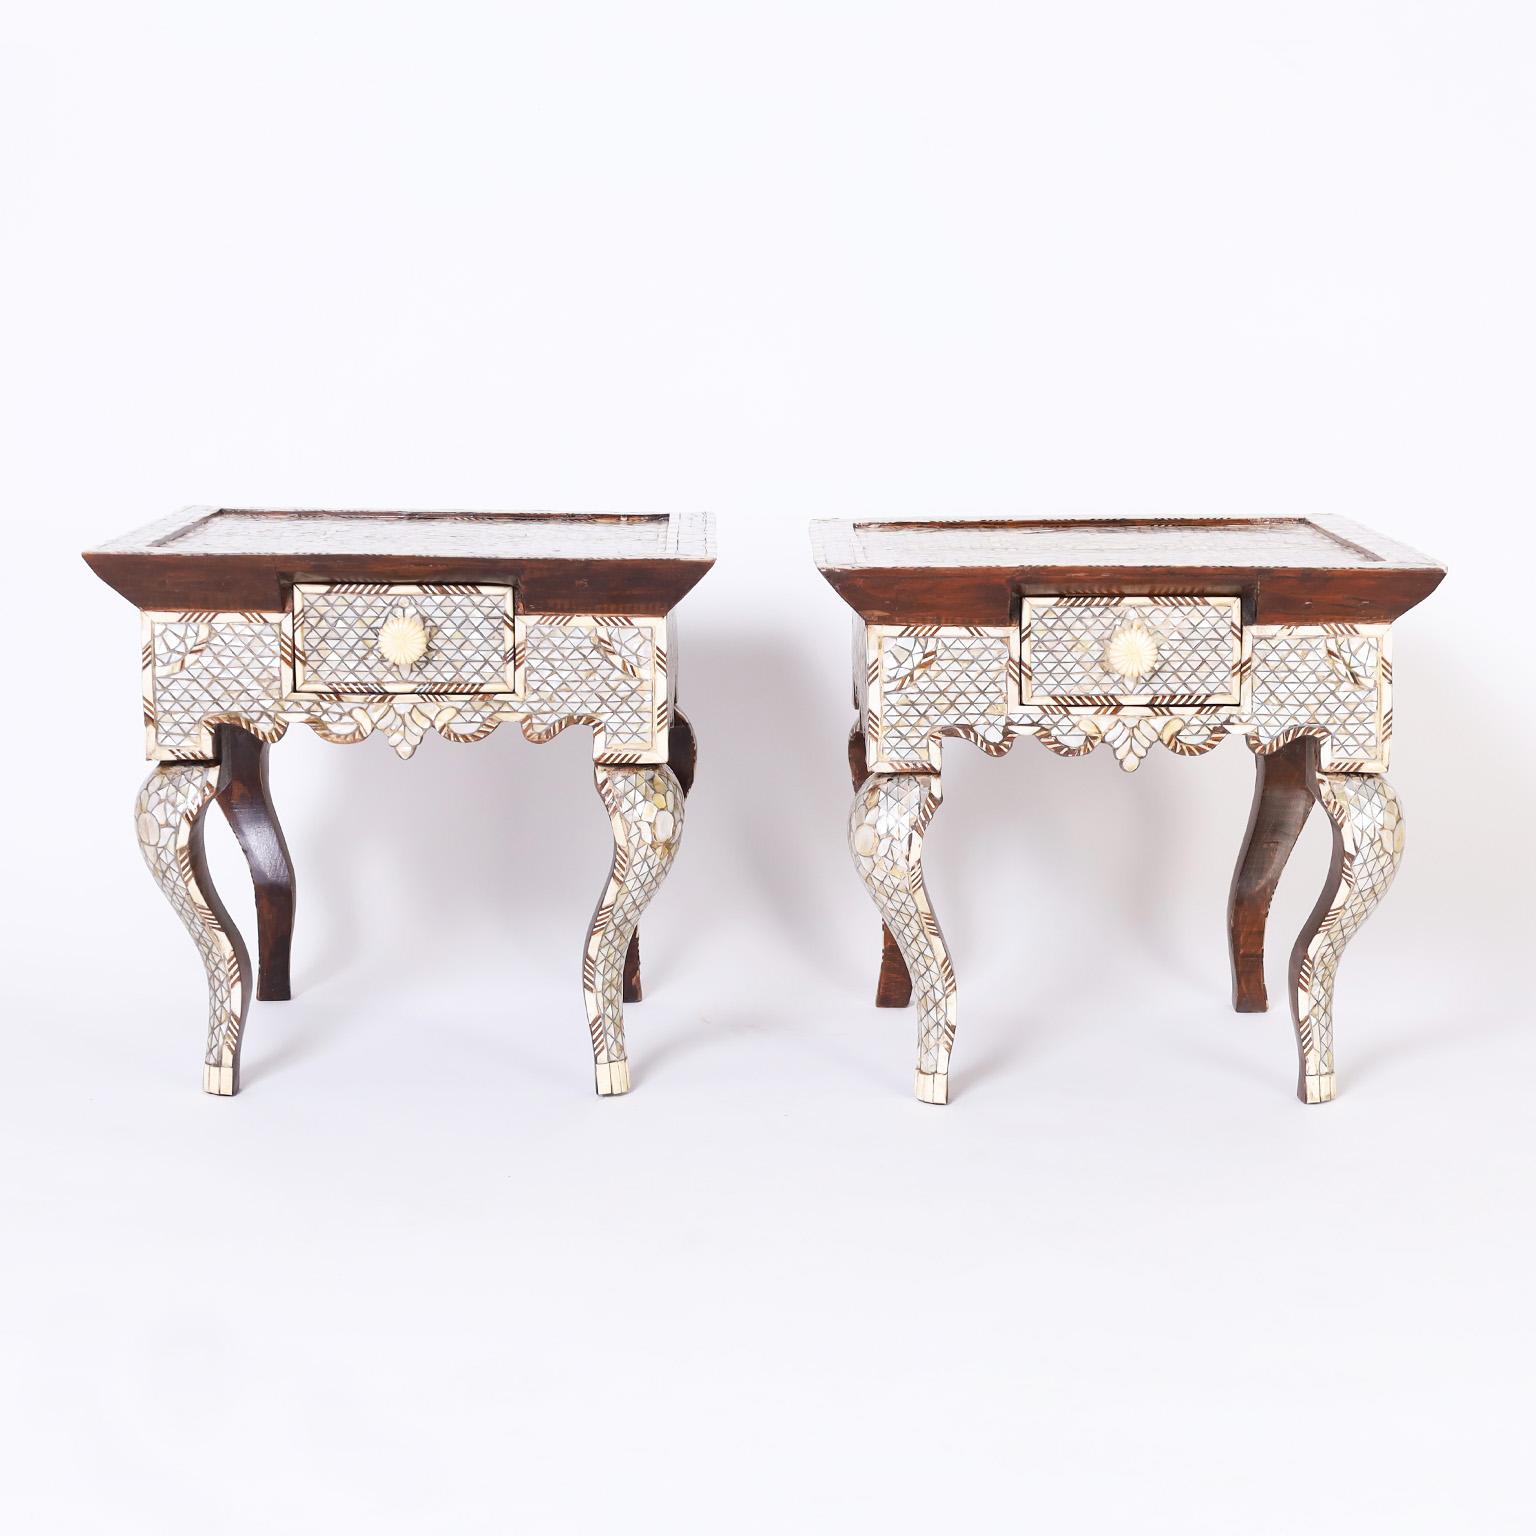 Pair of near eastern stands crafted in indigenous hardwoods in a dramatic form, featuring mosaics all around with mother of pearl, bone and walnut, one drawer with a carved bone pull, scalloped skirts, and cabriole legs.